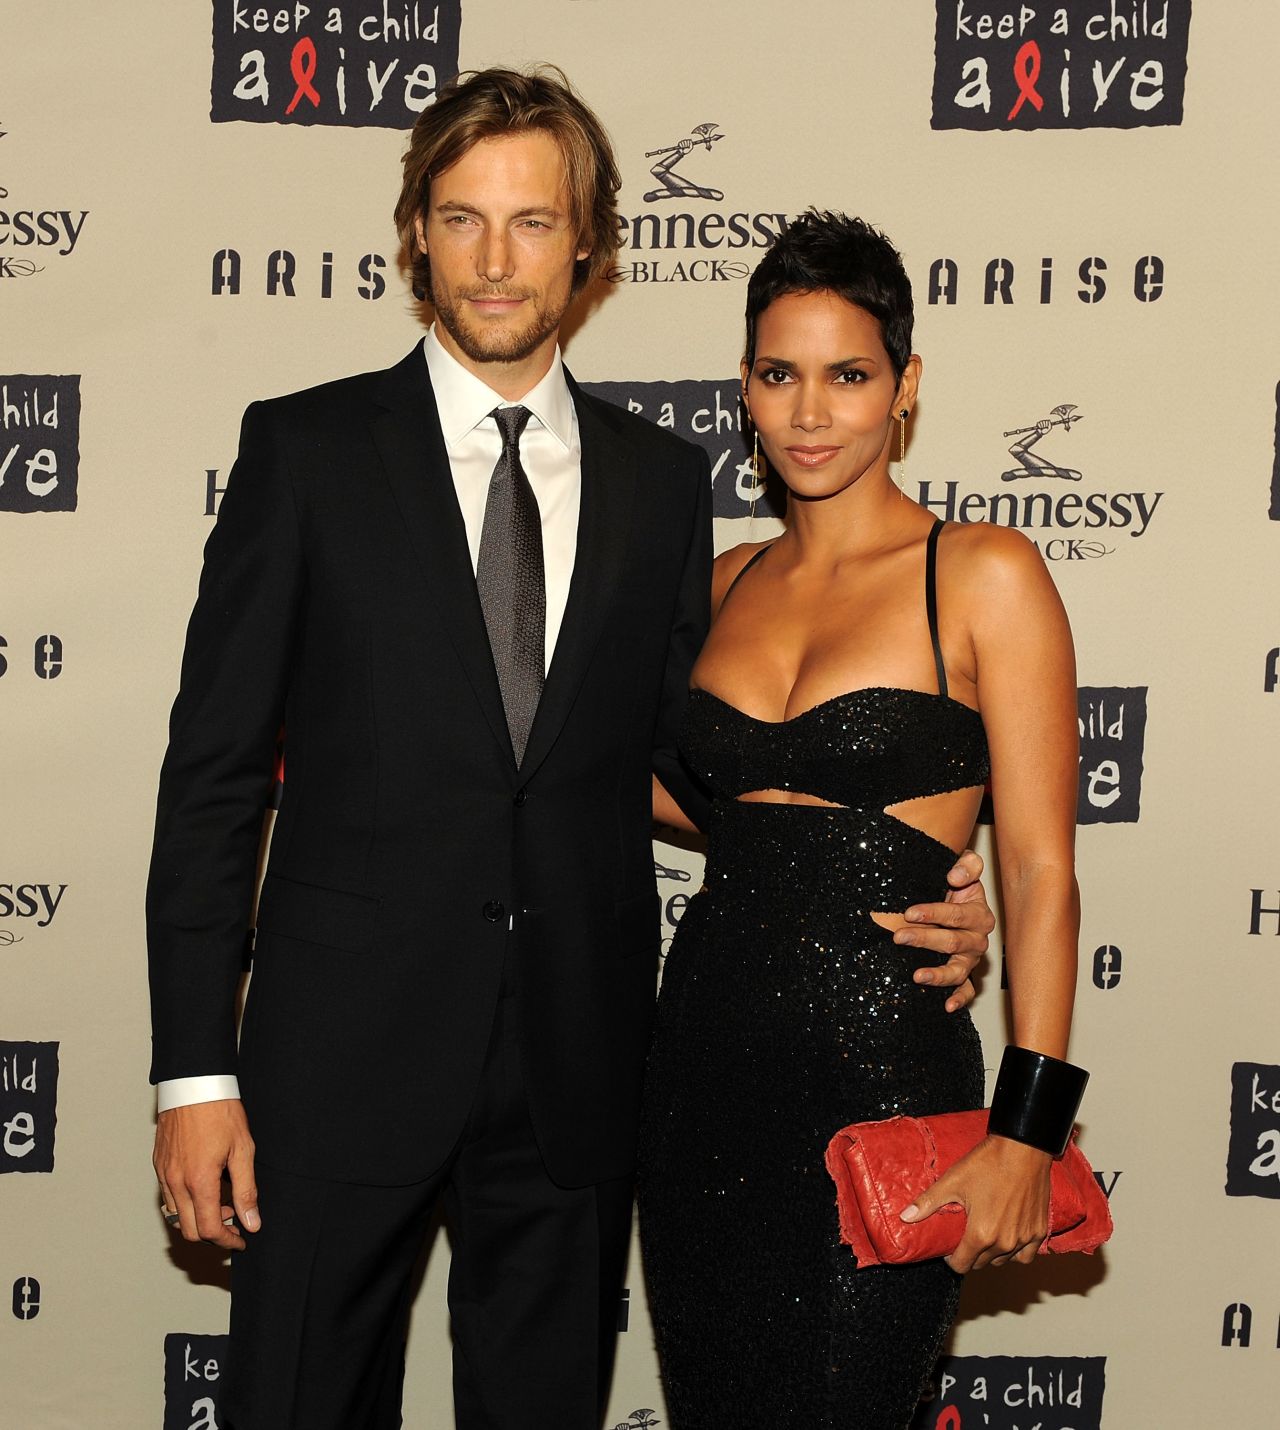 Halle Berry and her daughter's father, model Gabriel Aubry, haven't had the easiest breakup since they split in 2010. <a href="http://www.cnn.com/2012/11/27/showbiz/halle-berry-fight/index.html" target="_blank">There was a nasty fight in 2012</a> between Berry's then-fiance, Olivier Martinez, and Aubry. In June 2014, the Oscar-winning actress was ordered to pay over $16,000 in child support each month to her ex.